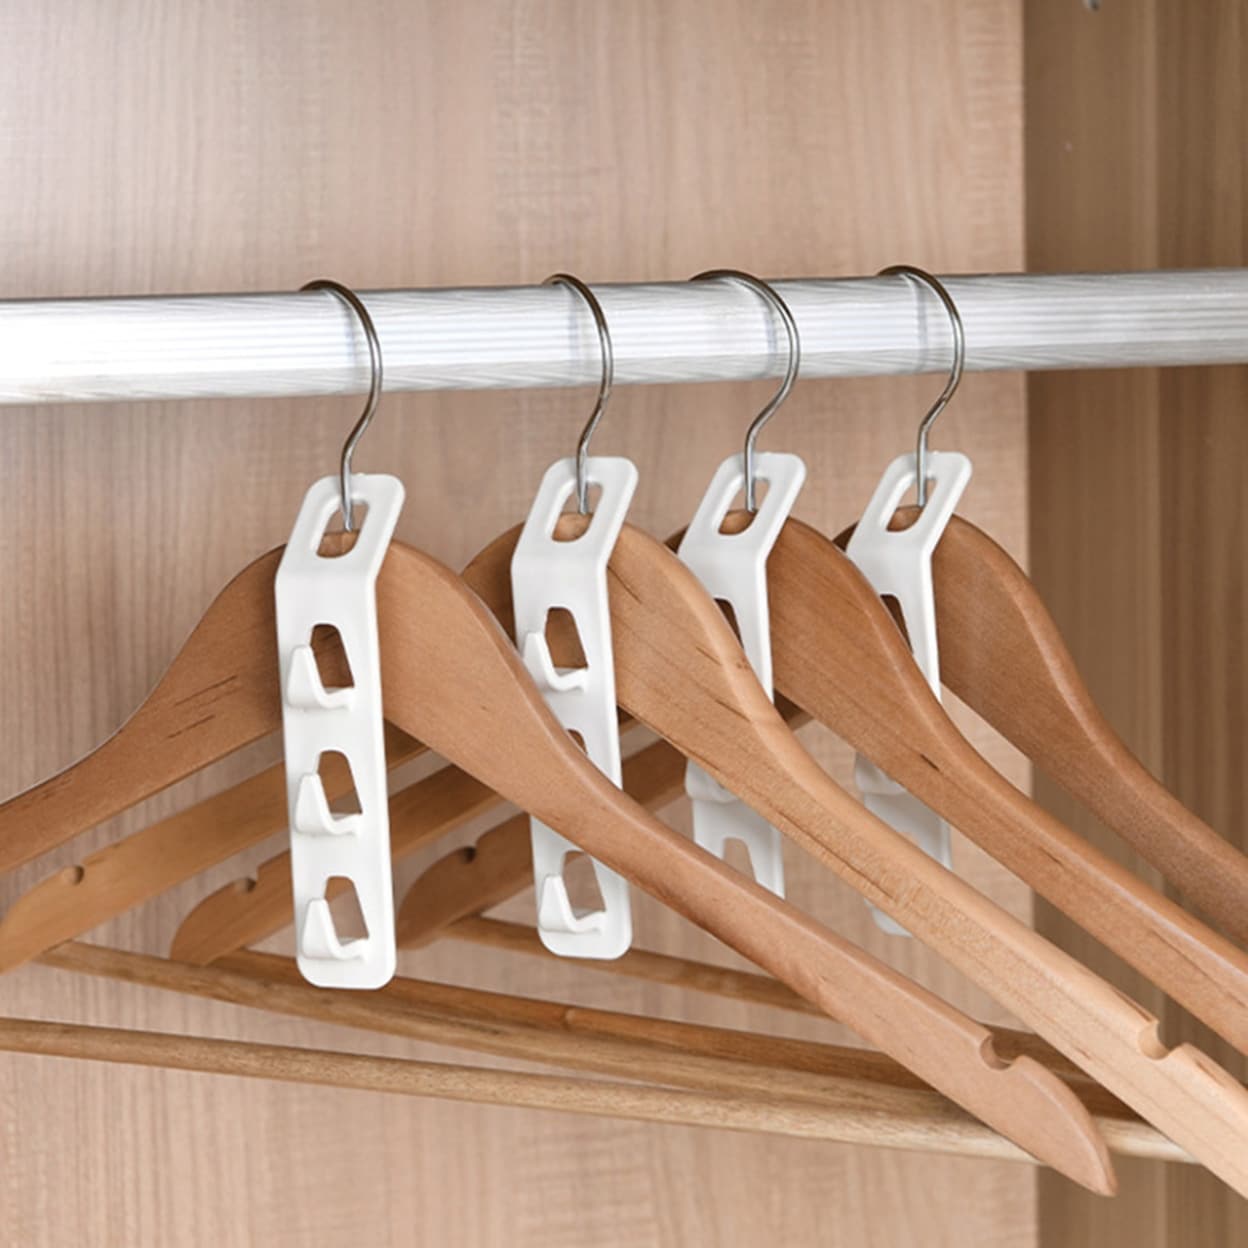 https://ak1.ostkcdn.com/images/products/is/images/direct/3ec14bd53669f07c4eea02a0b035e01da0c2a1f7/1-Box-Space-Saving-Non-Slip-Clothes-Hanger-Hooks-Pp-Dresses-Coats-Clothes-Hanger-Connection-Rack-Home-Supplies.jpg